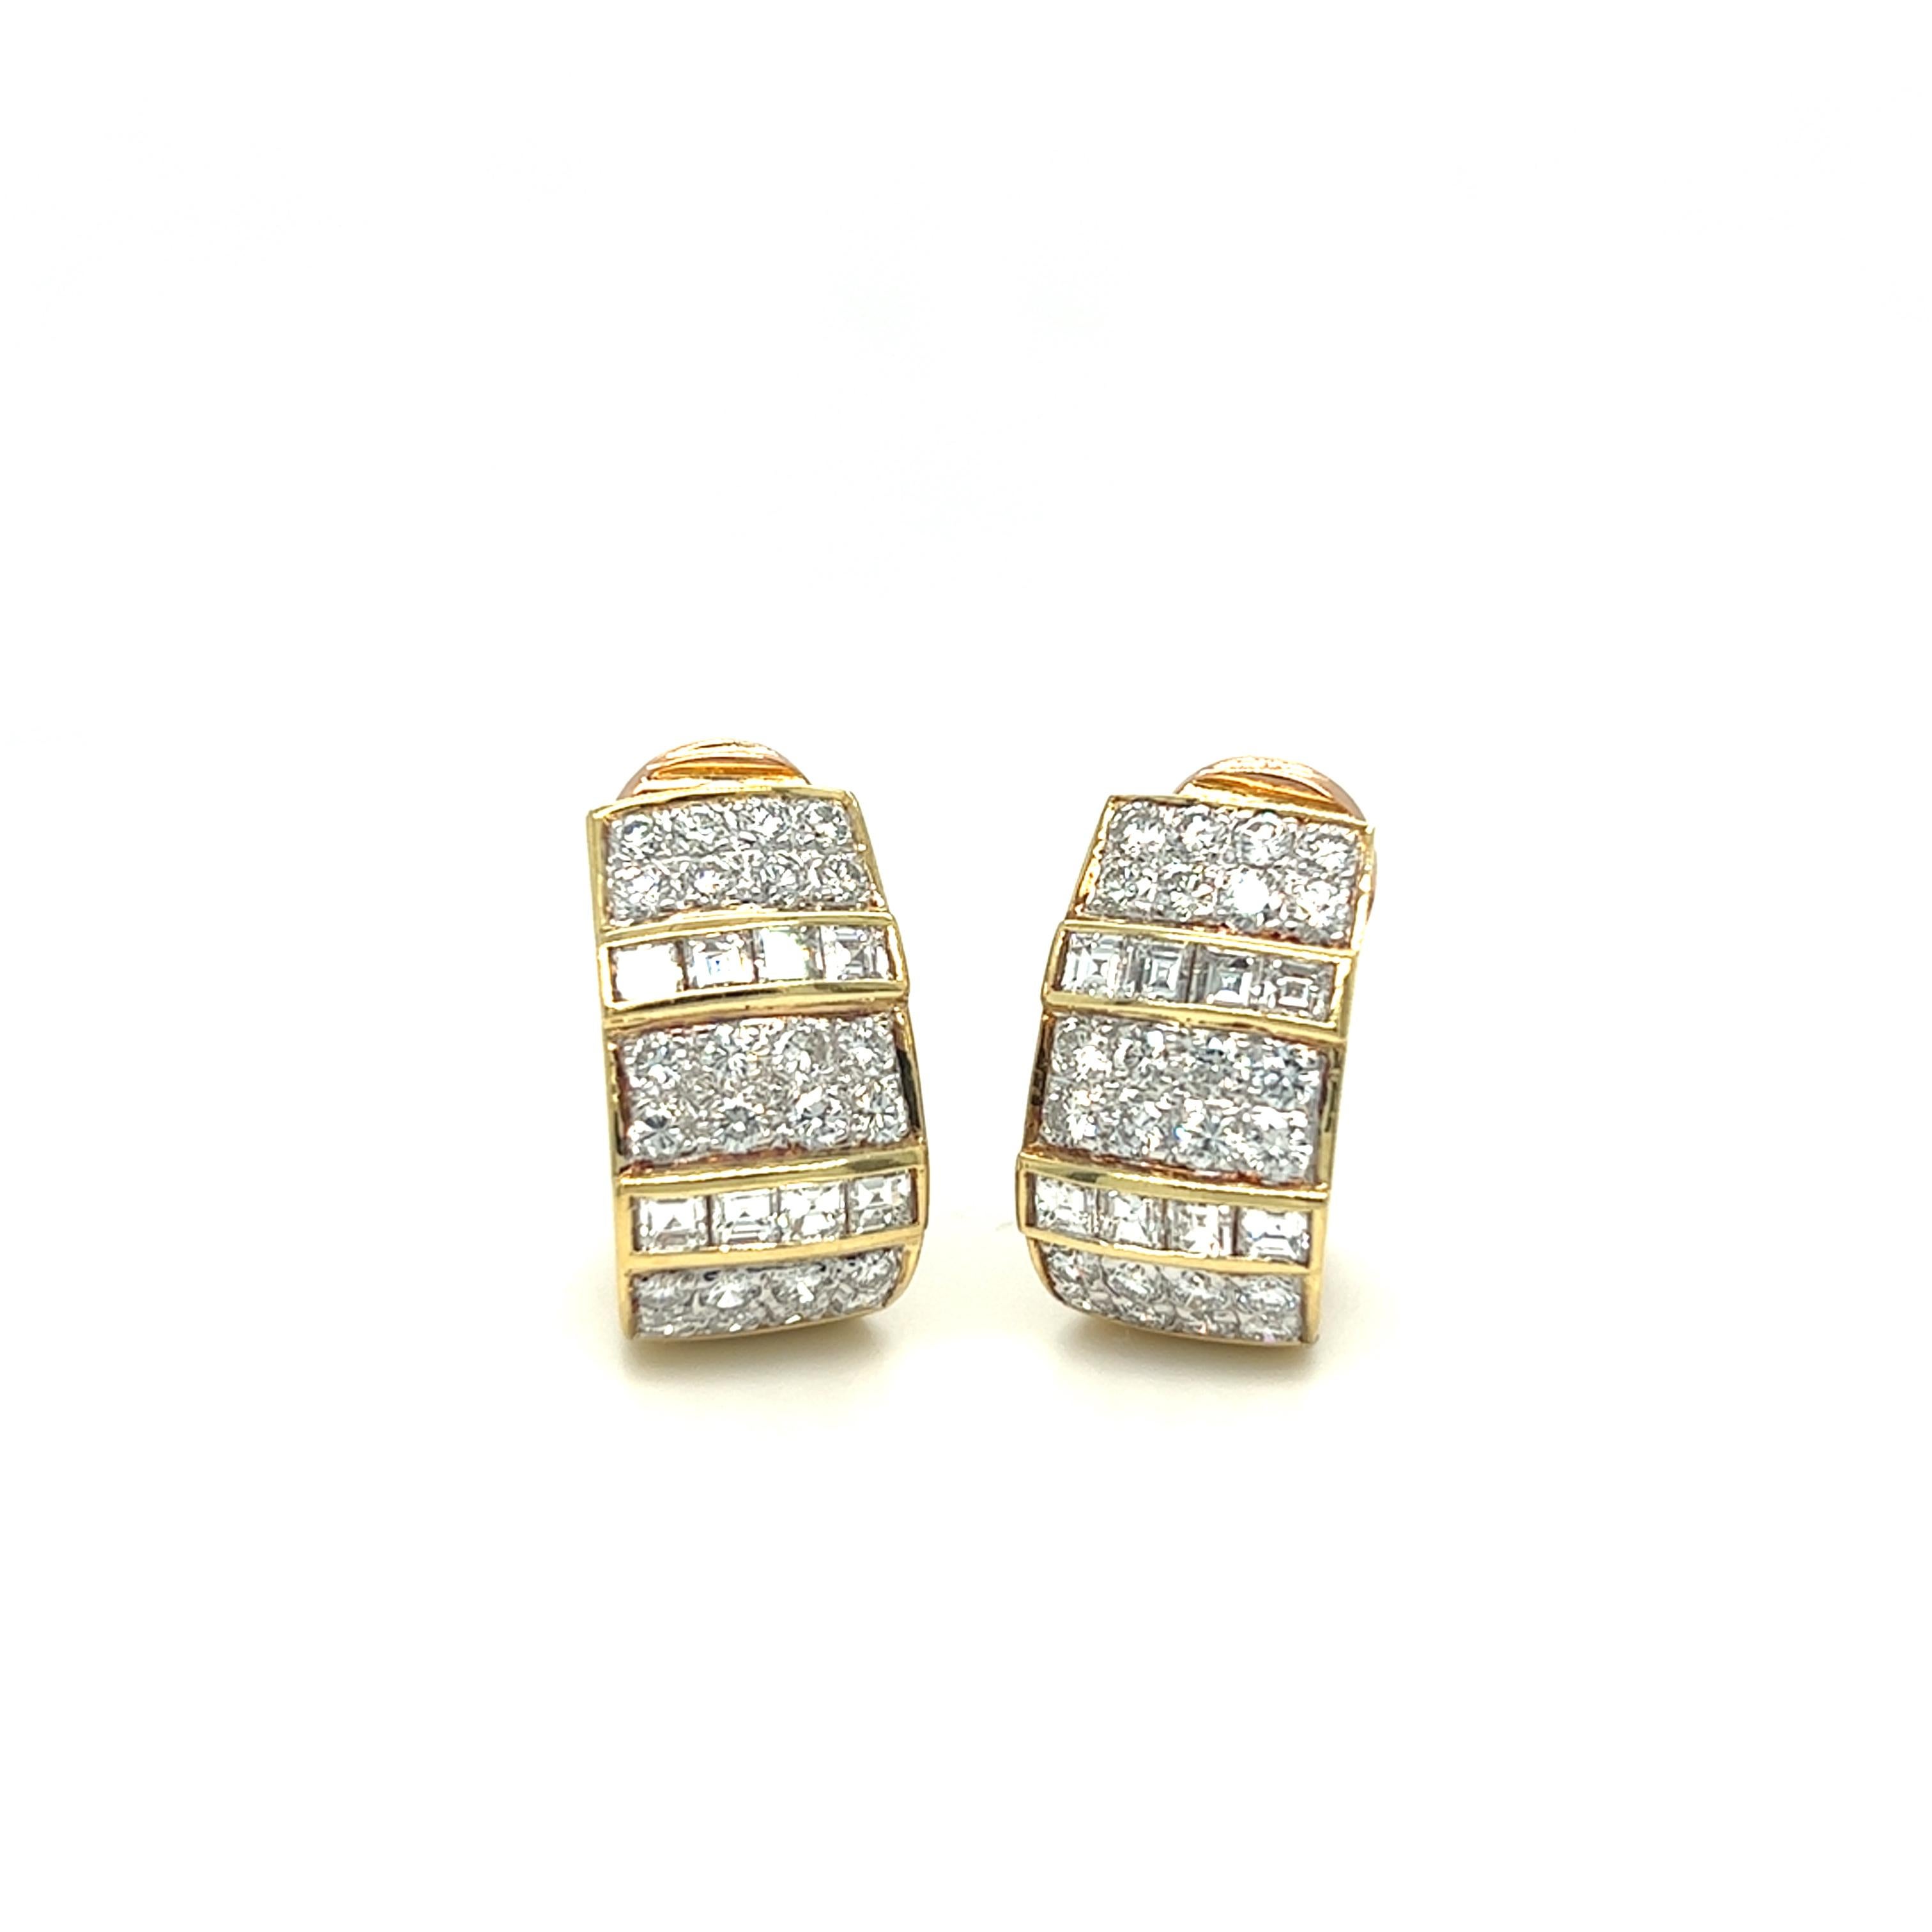 Dated 1960s, this beautiful pair of mixed cut diamond earrings features approximately 3.68 carats of round brilliant cut and square cut diamond. All are eye clean with F-G color and VS clarity. They are quite a statement piece, perfect for a night